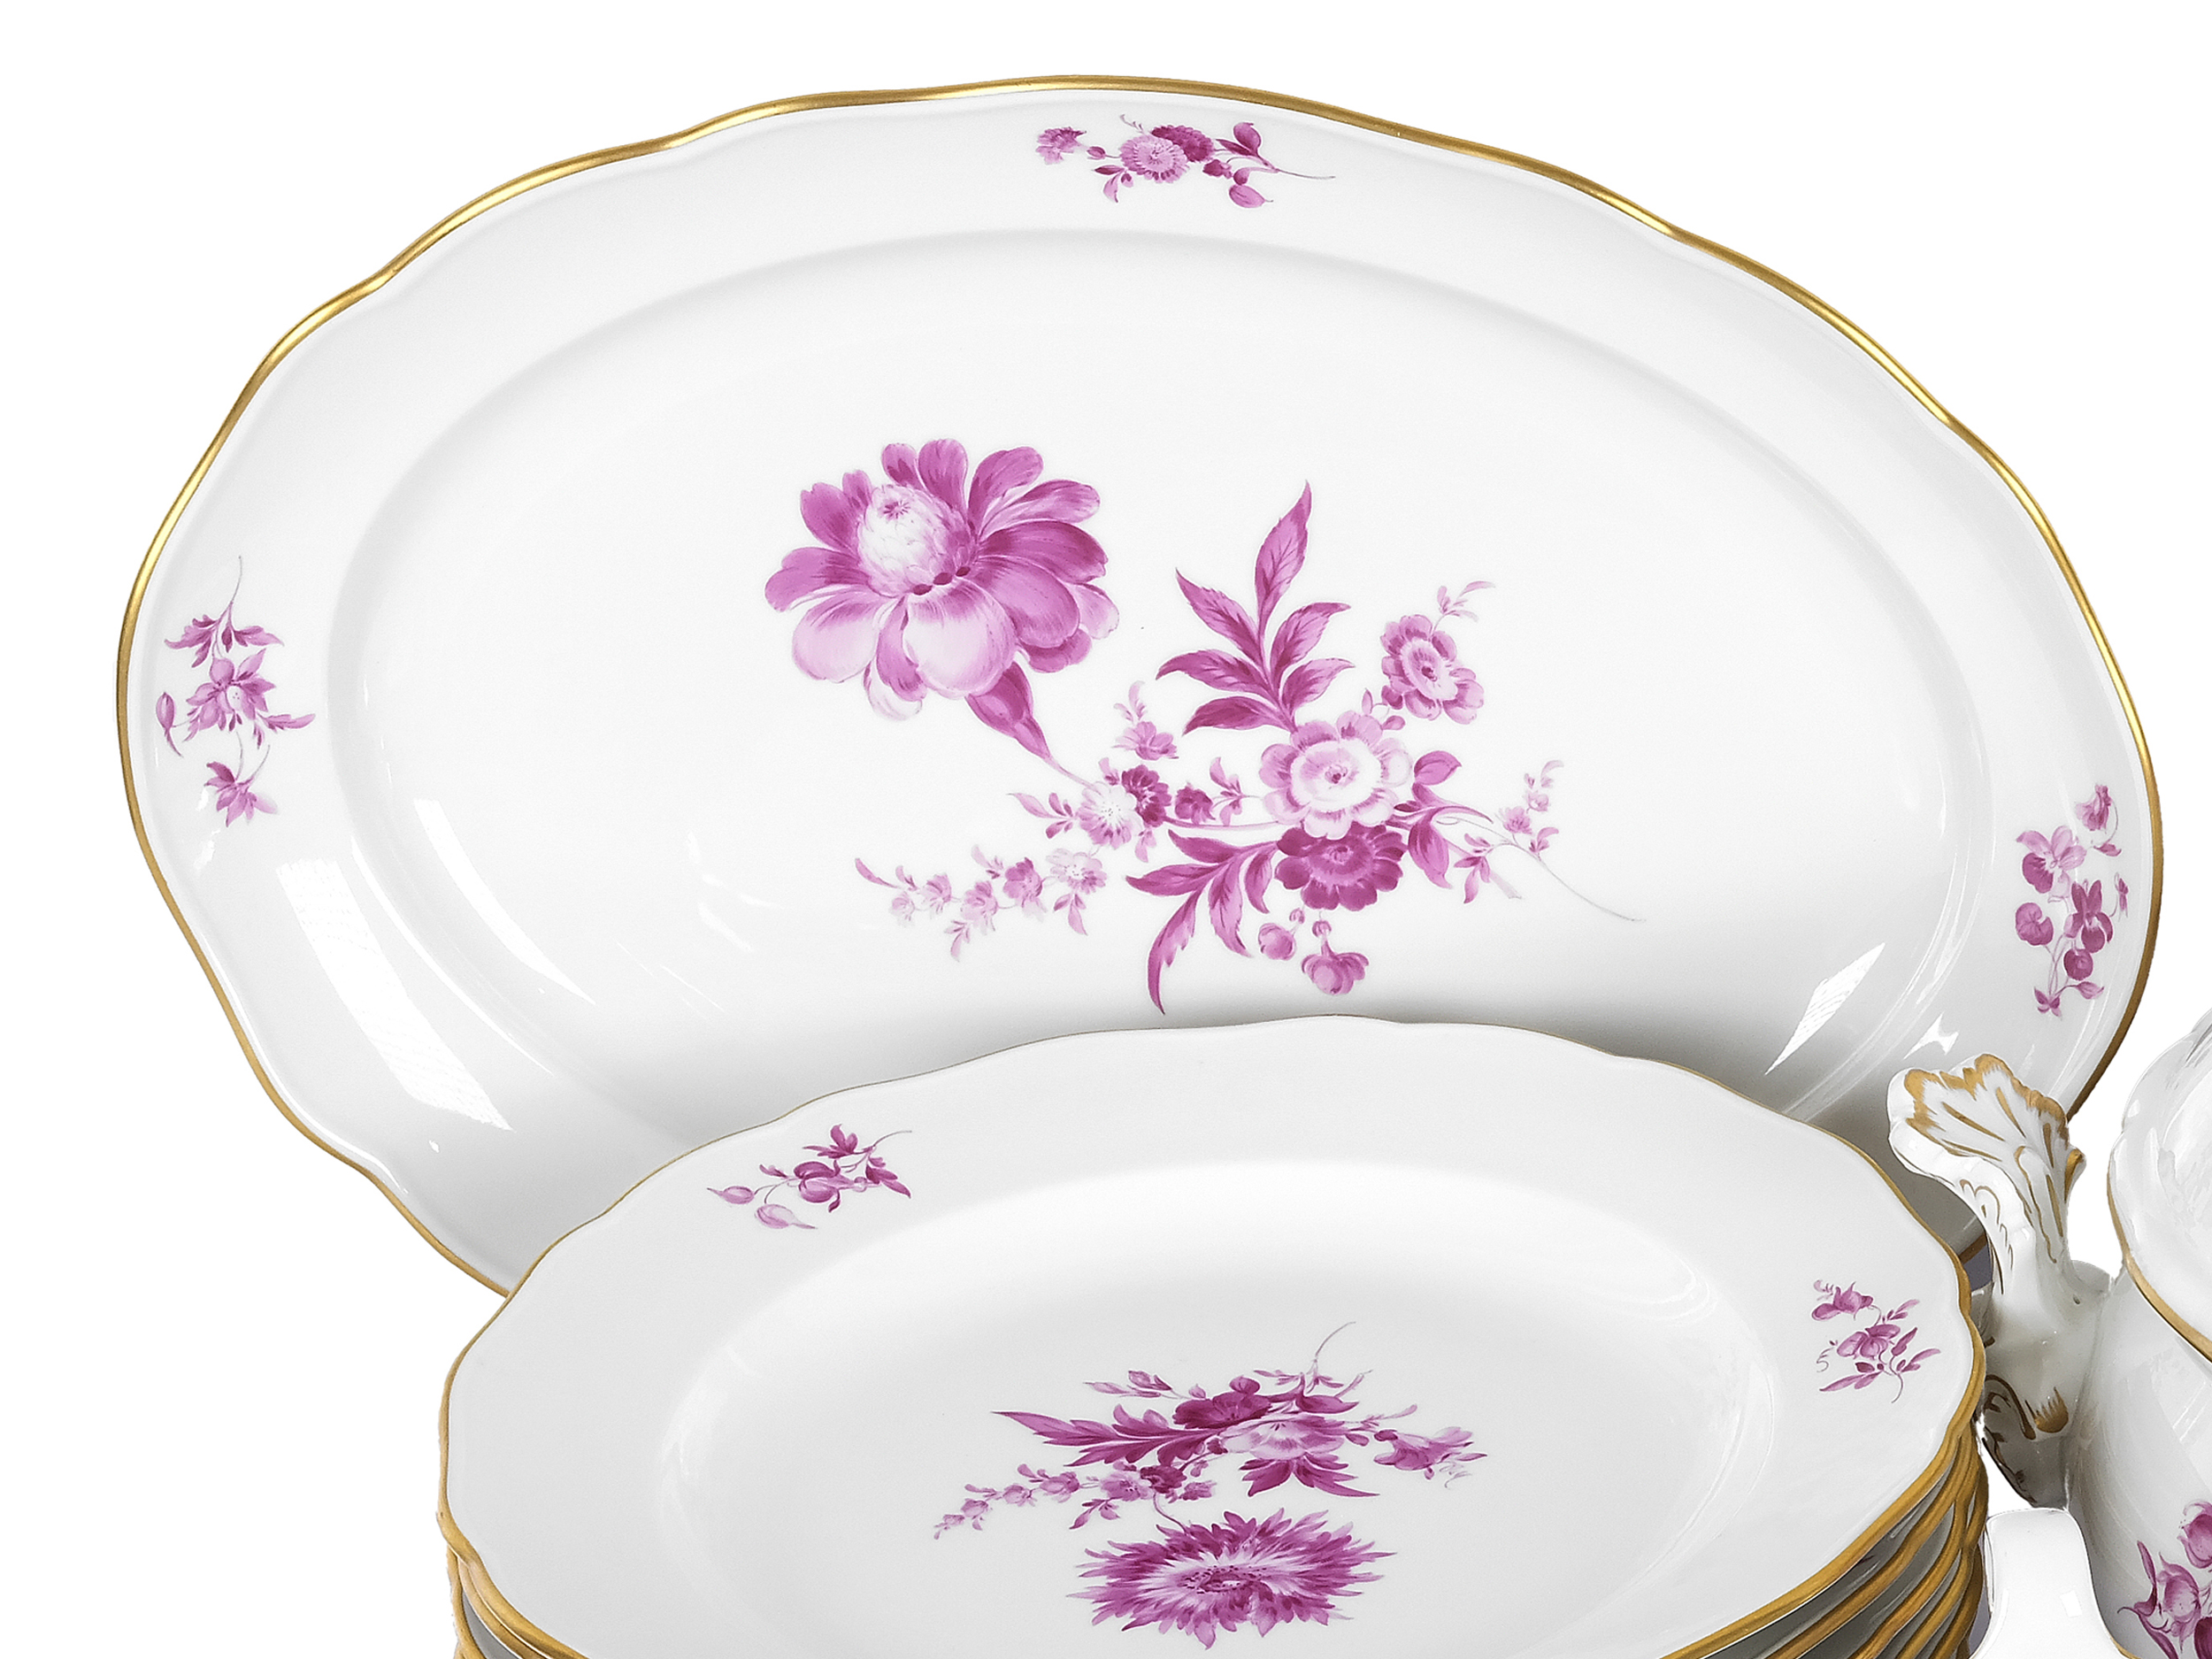 Dinner service for 6 persons, 24-piece, Violet foral decor, Meissen - Image 3 of 7